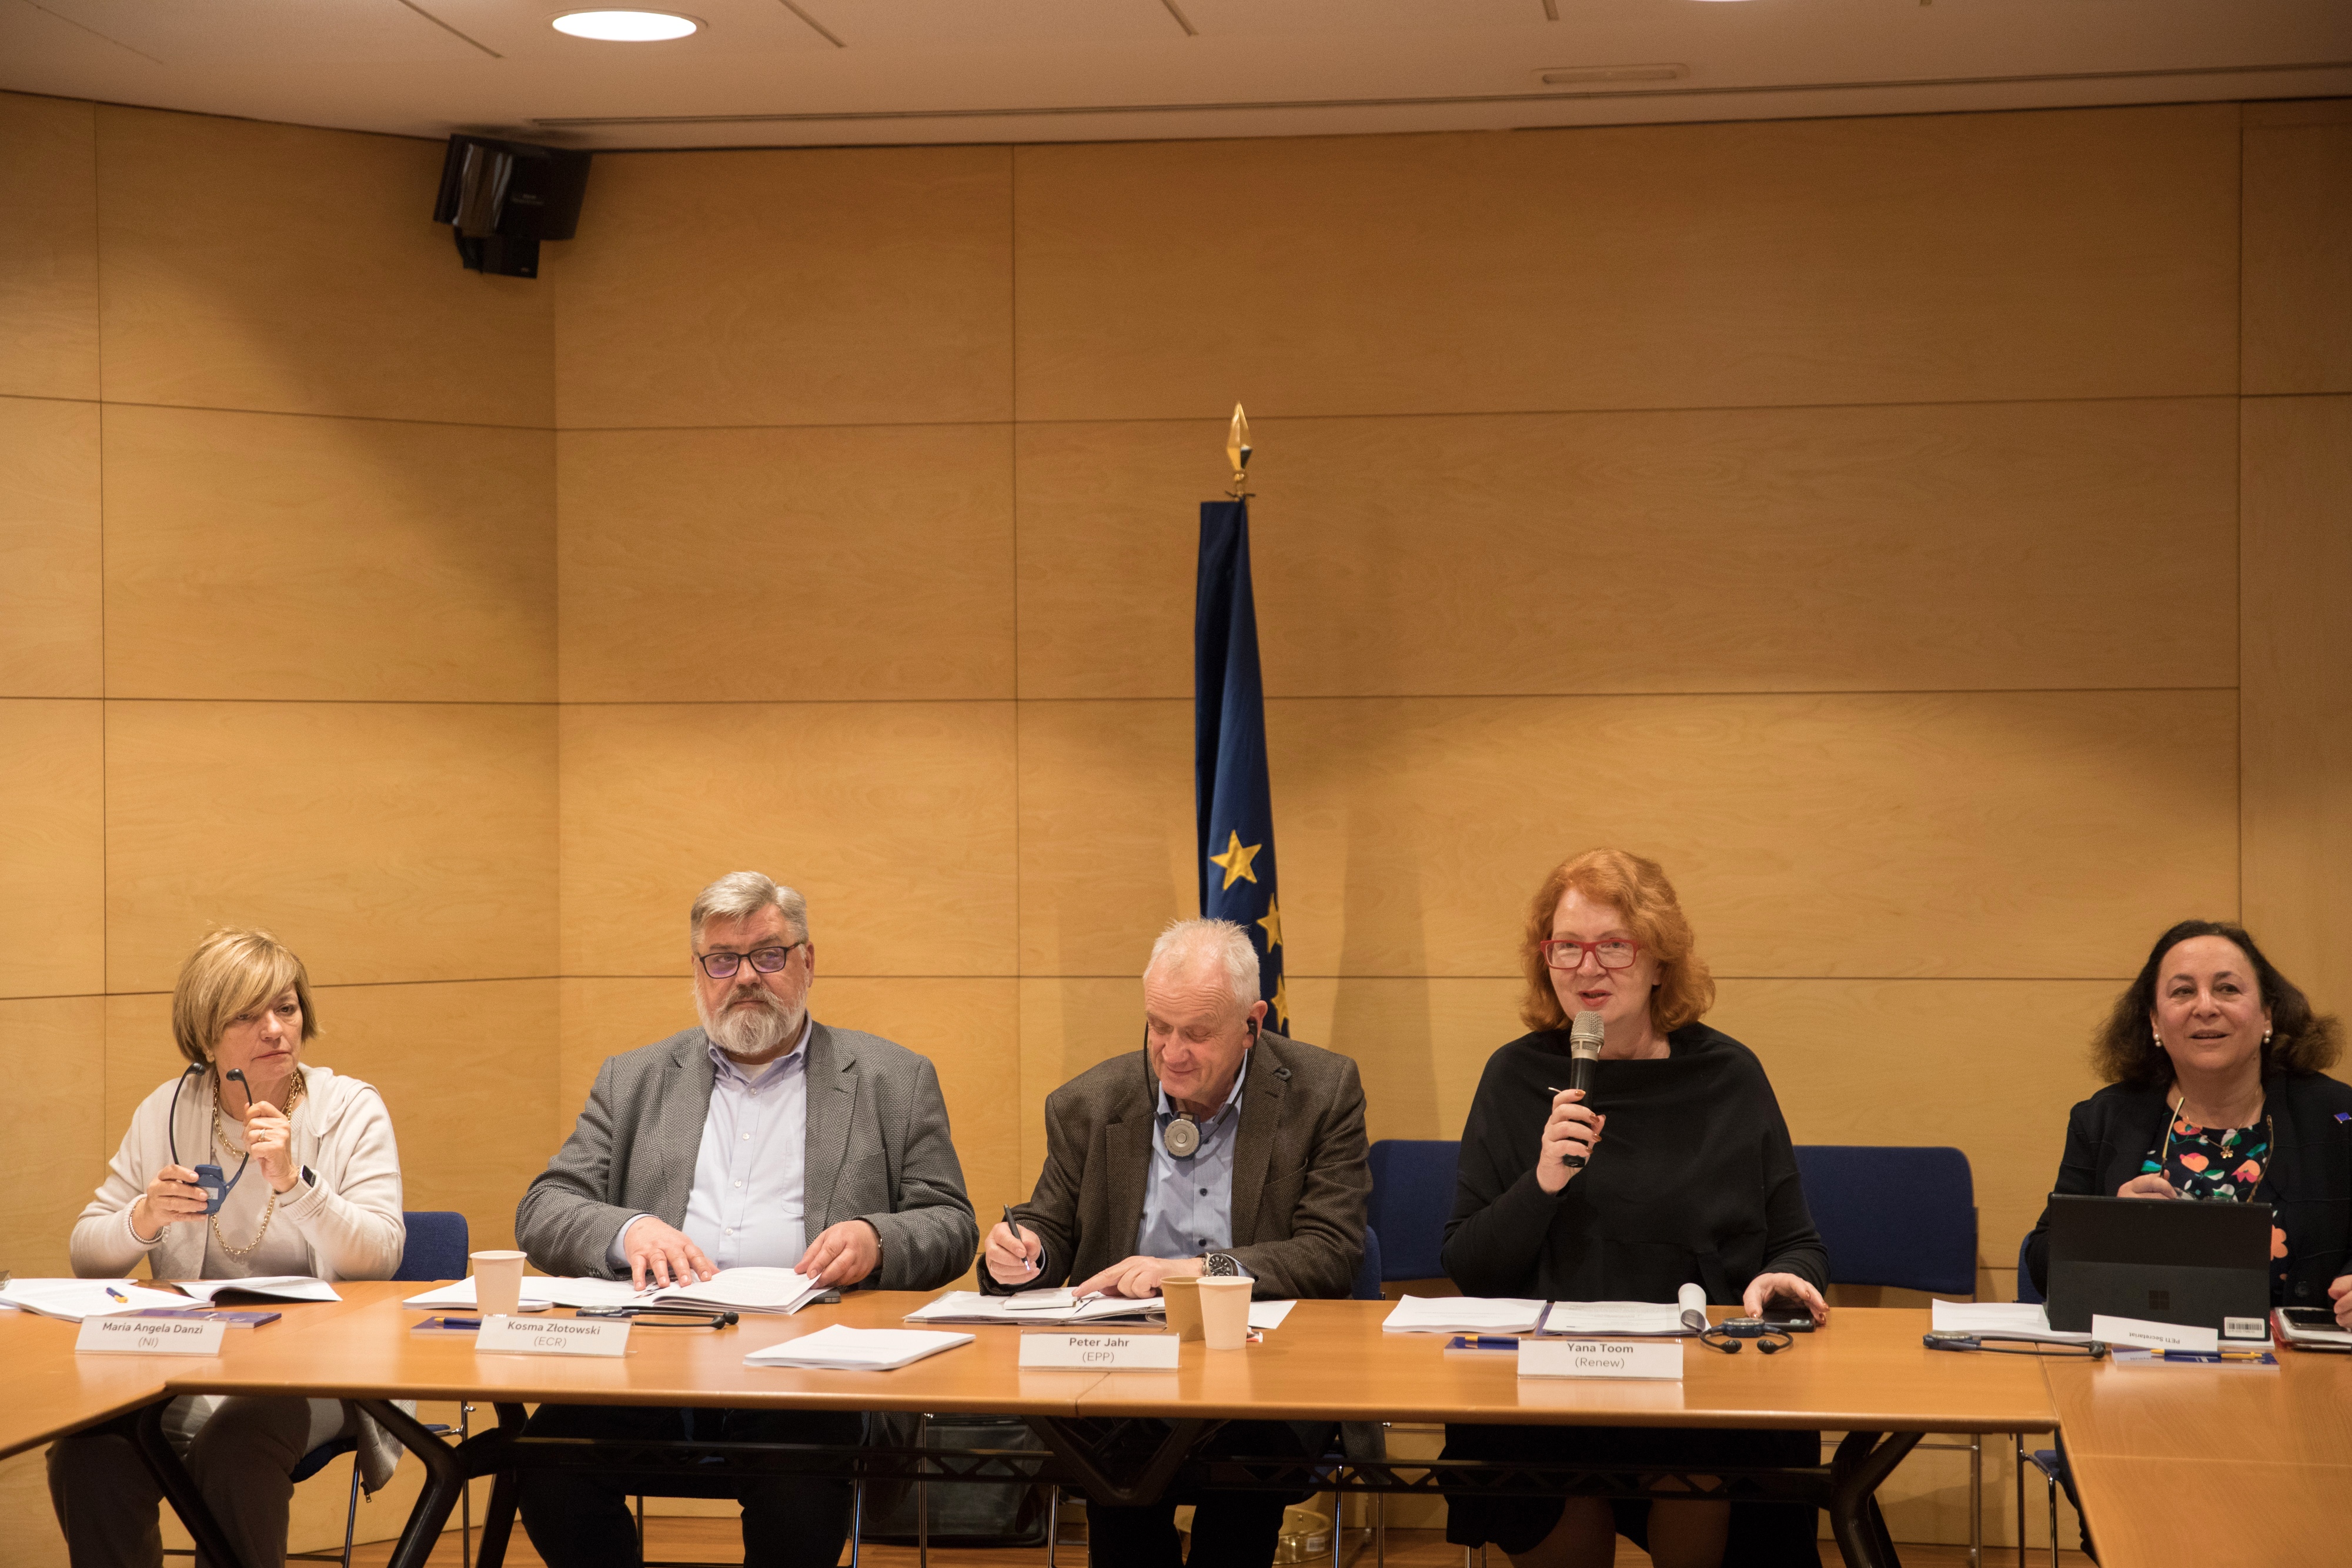 DOCUMENT: Fundació Bofill report to MEPs stresses "educational equity" of Catalan school model